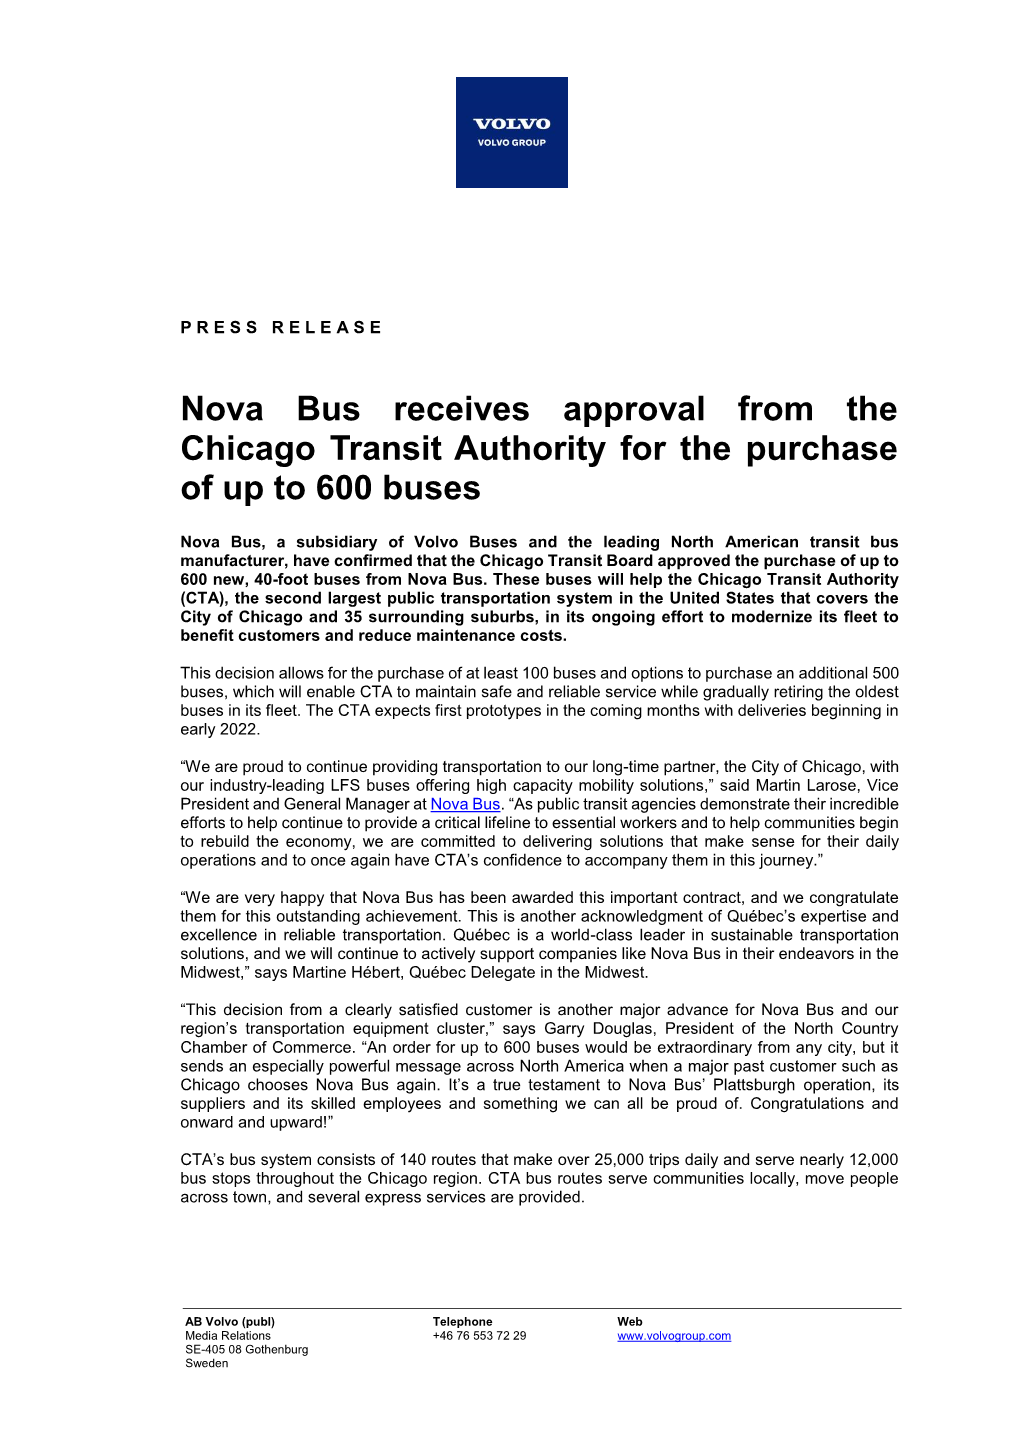 Nova Bus Receives Approval from the Chicago Transit Authority for the Purchase of up to 600 Buses